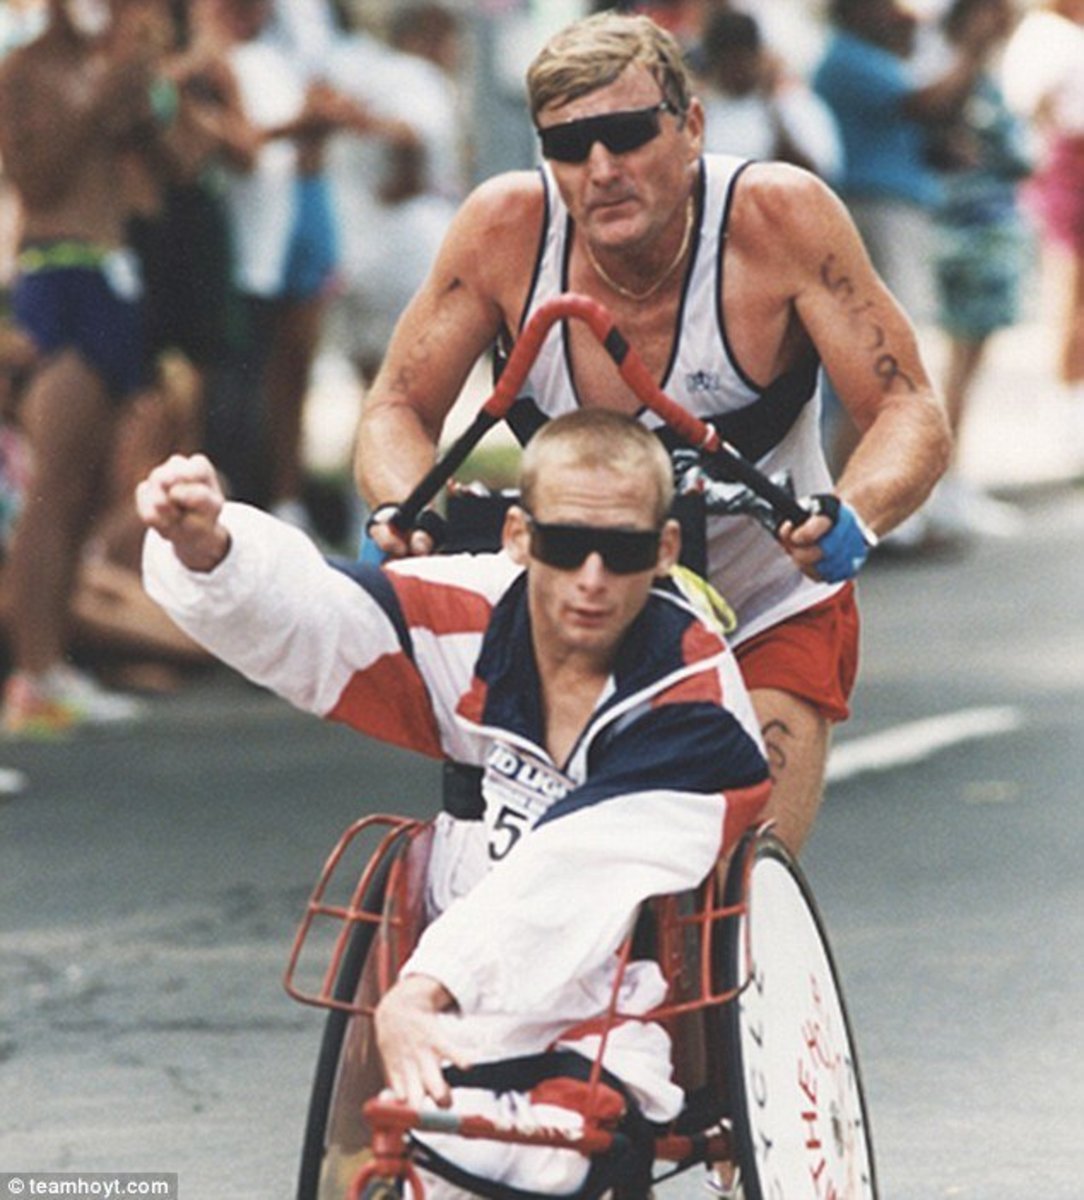 Image of Dick Hoyt and Rick Hoyt